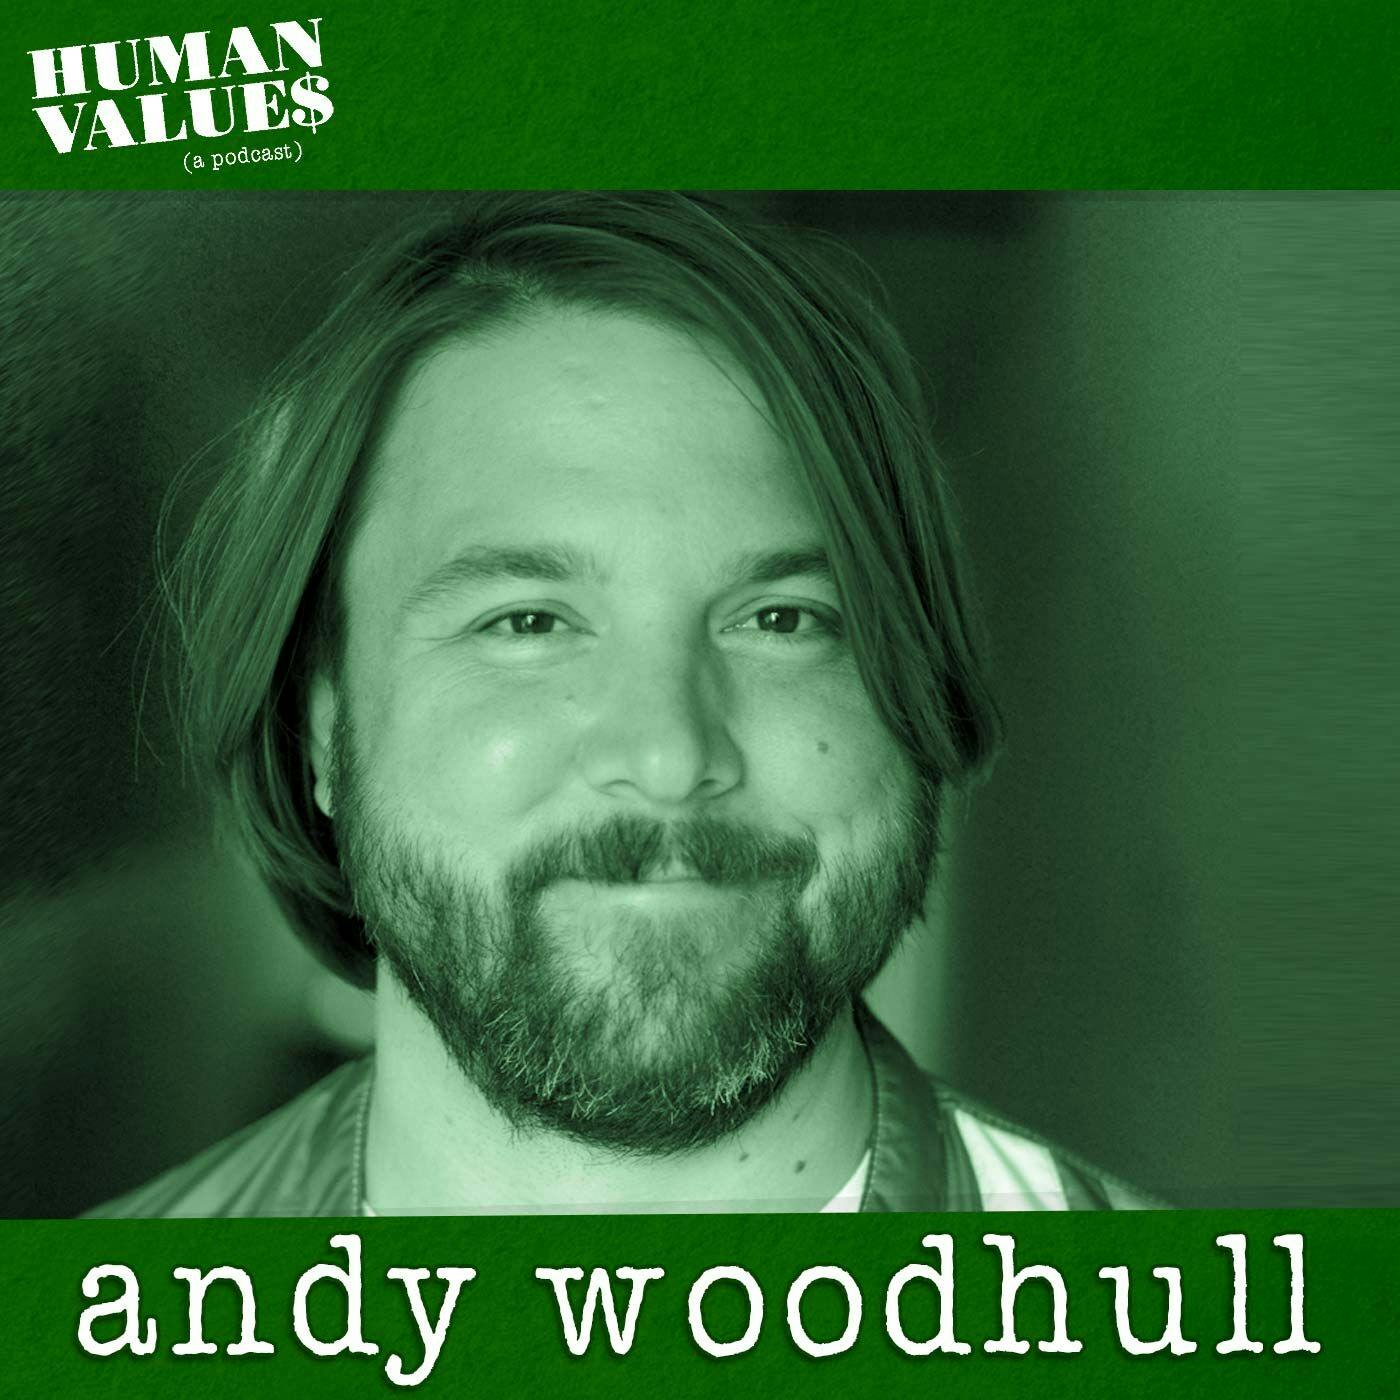 Halloween Ends, Woody Allen’s Voice, & Hair Removal with Andy Woodhull